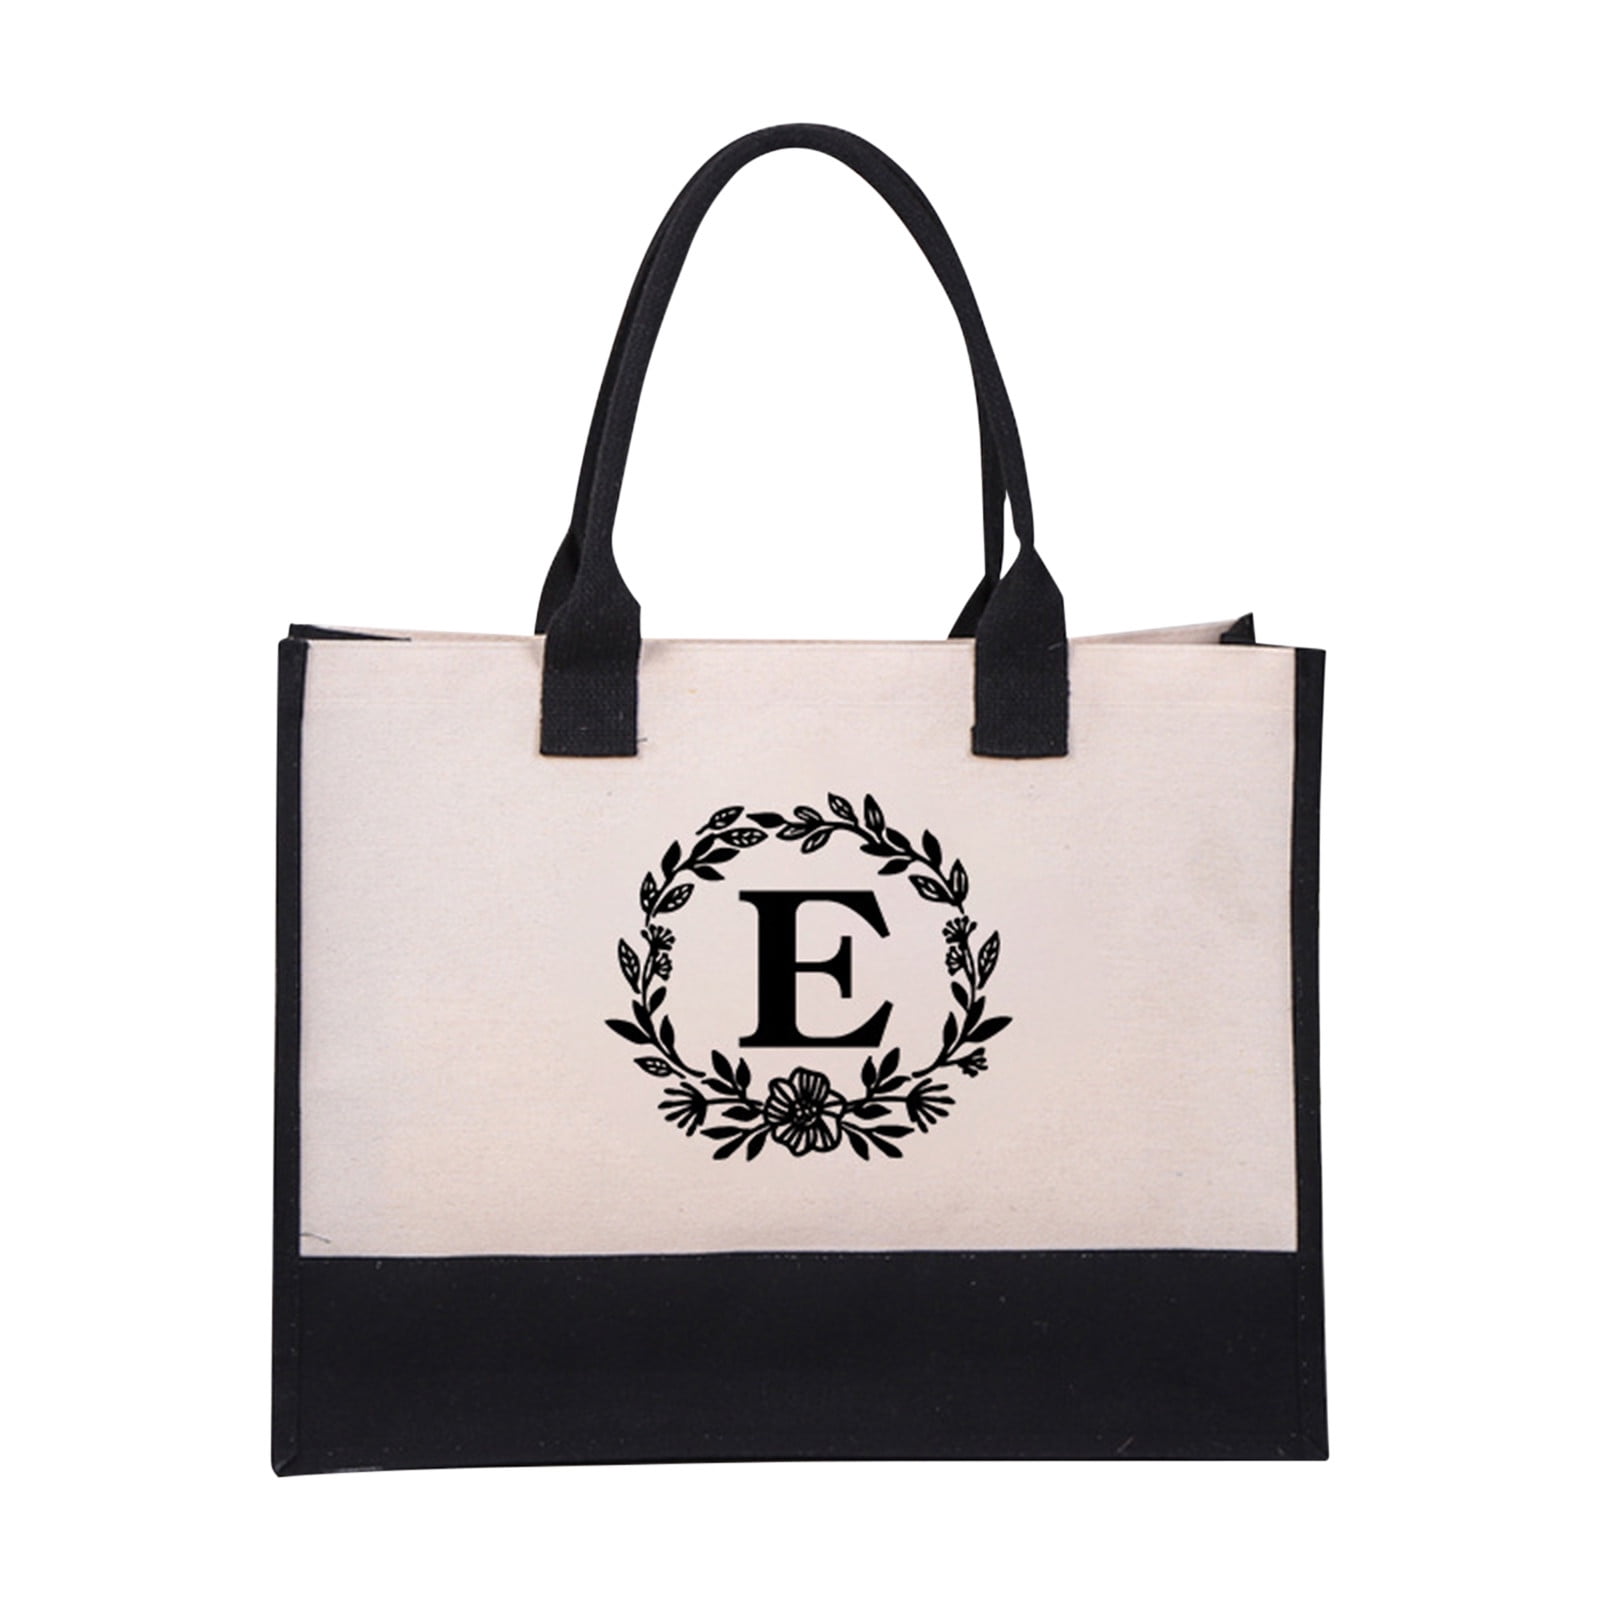  Binggemen Personalized Initial Canvas Tote Bag with